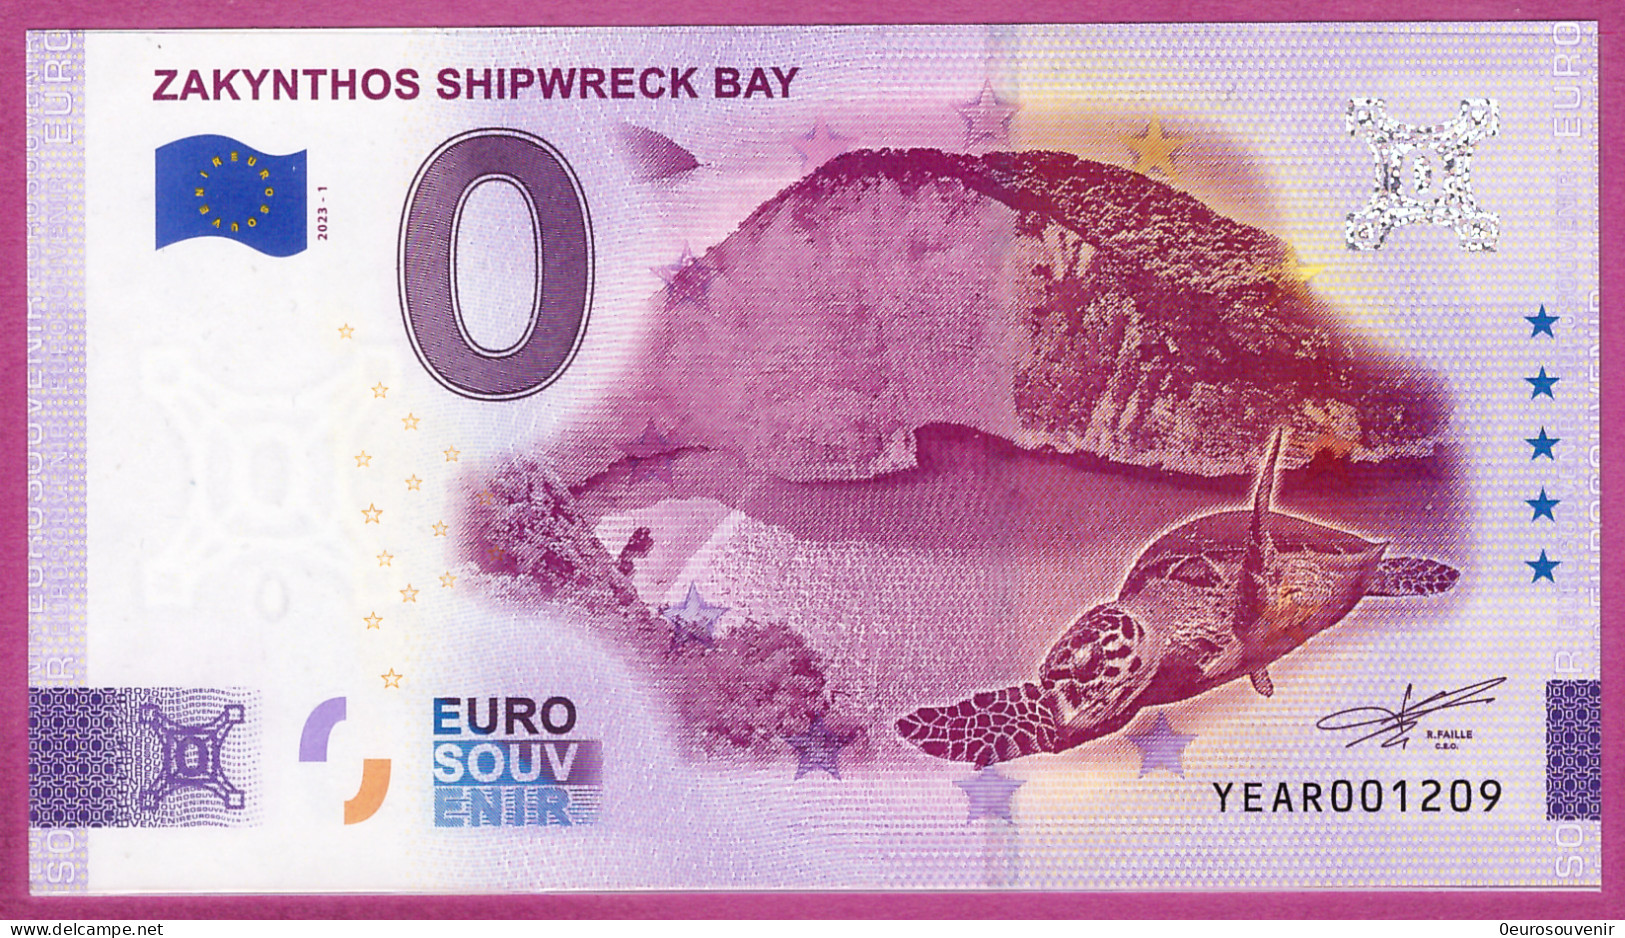 0-Euro YEAR 2023-1 ZAKYNTHOS SHIPWRECK BAY - Private Proofs / Unofficial